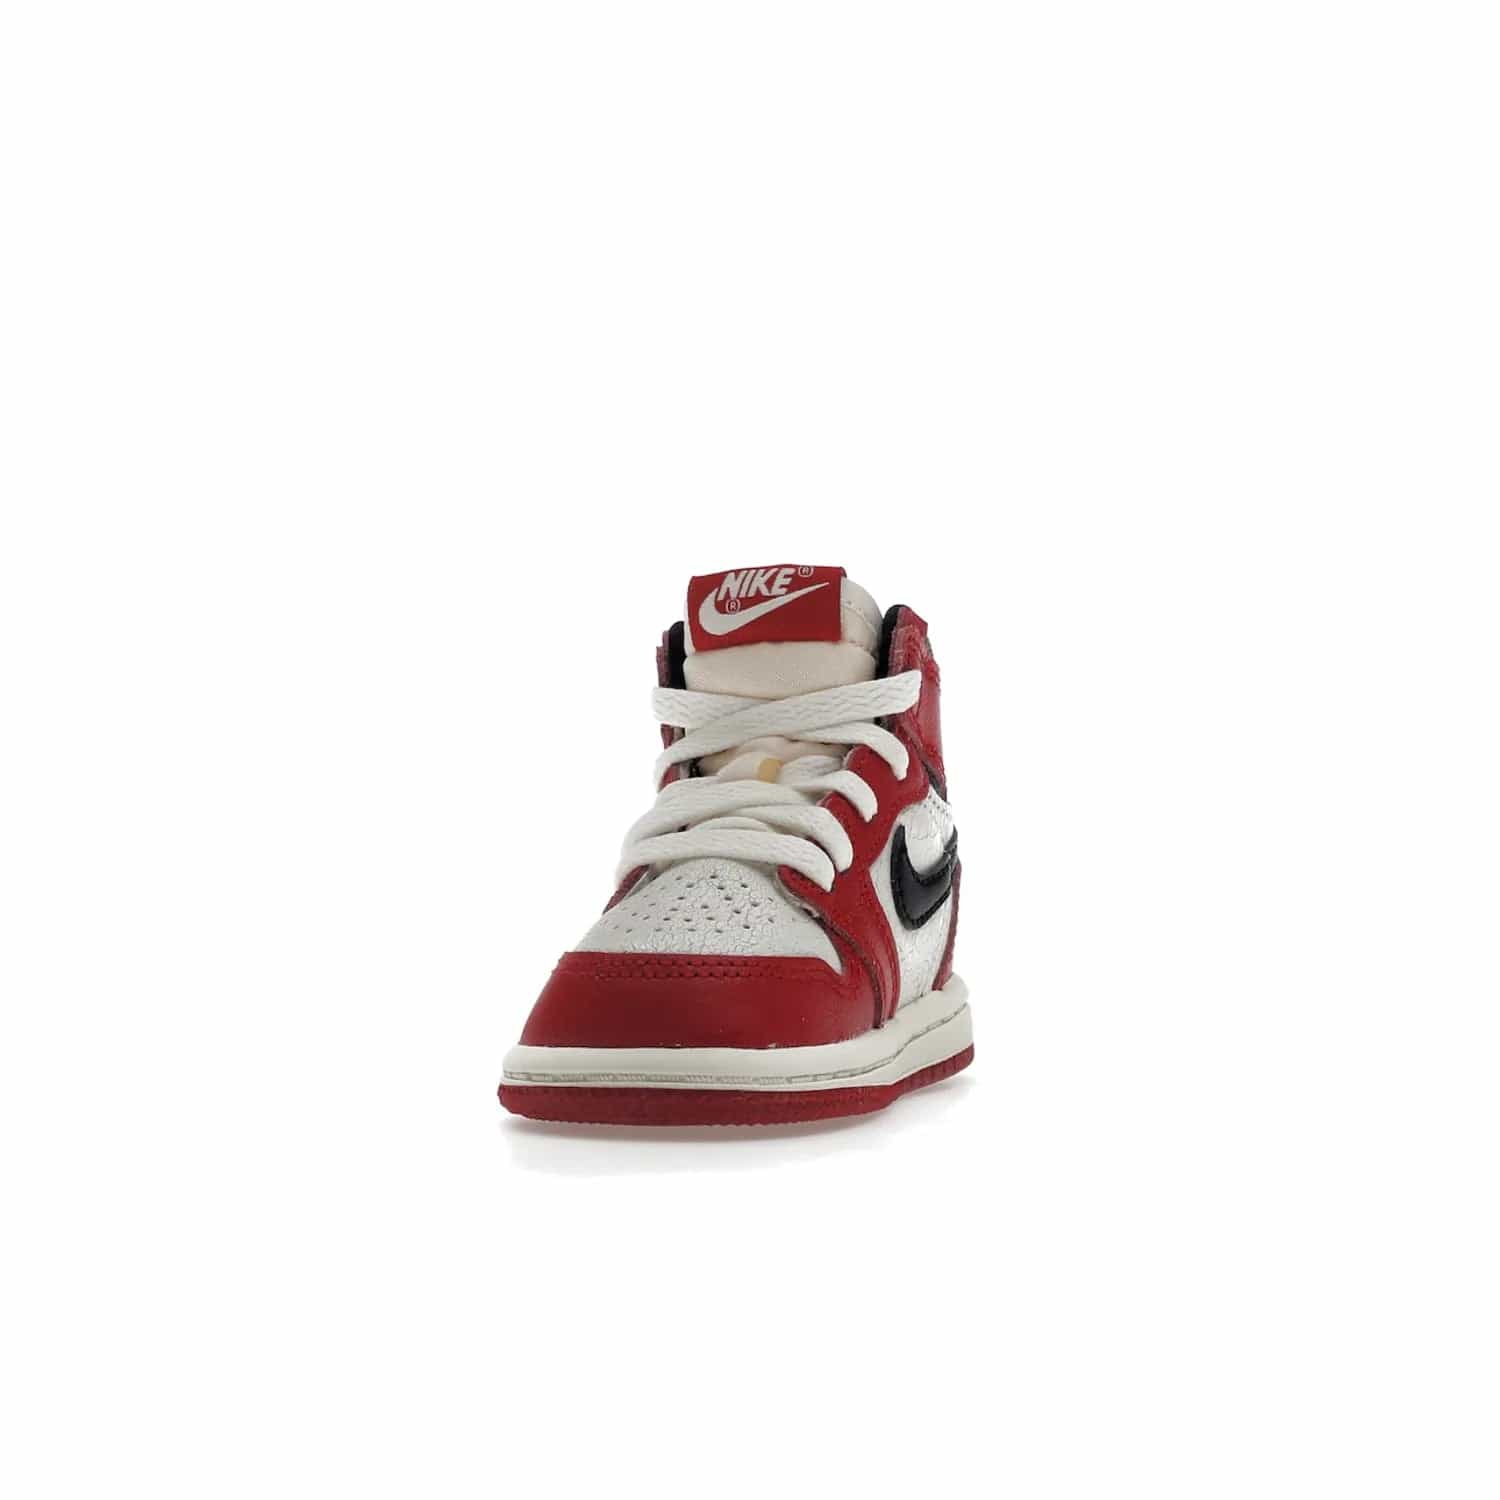 Jordan 1 Retro High OG Chicago Lost and Found (TD) - Image 12 - Only at www.BallersClubKickz.com - Introducing the Air Jordan 1 Retro High OG Lost and Found TD – a vibrant combination of 4 colors: muslin, varsity, sail and black. Featuring a crackled leather upper and AIR units for comfort and a signature Wings logo, these retro shoes add comfort and style for your little ones at $70. Get your pair before 19th December 2022!